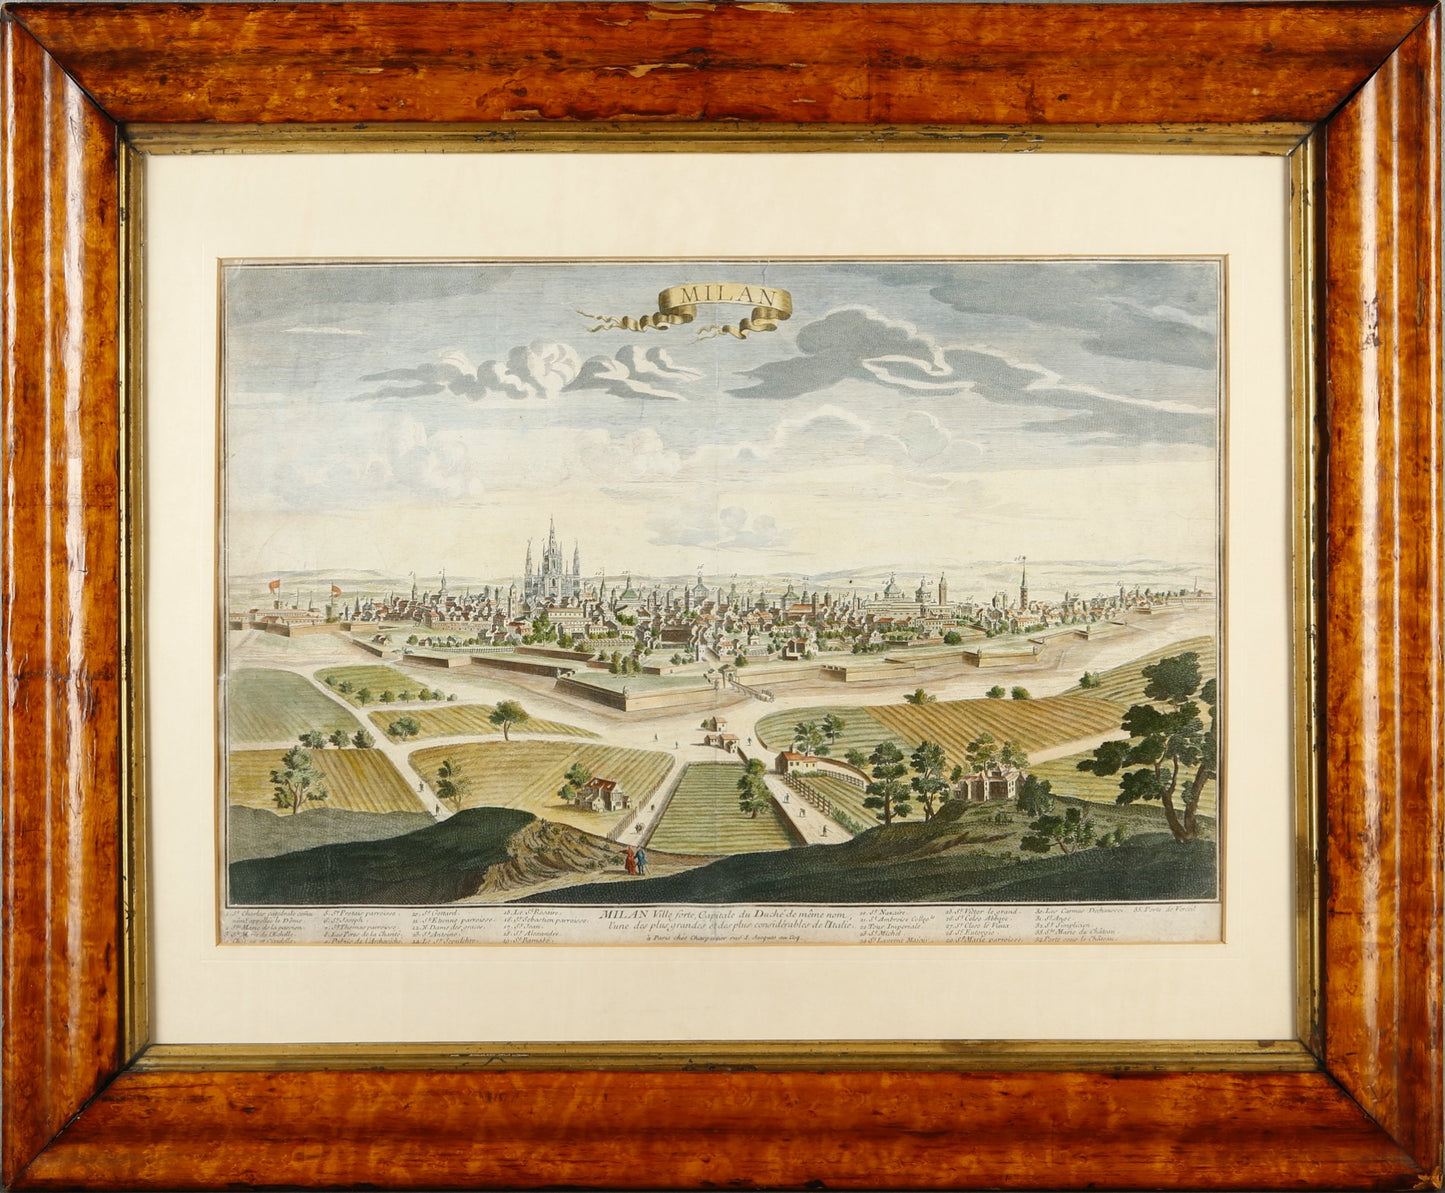 Antique Hand-colored Engraving - View of Milan - Cityscape of Italy - P. Aveline